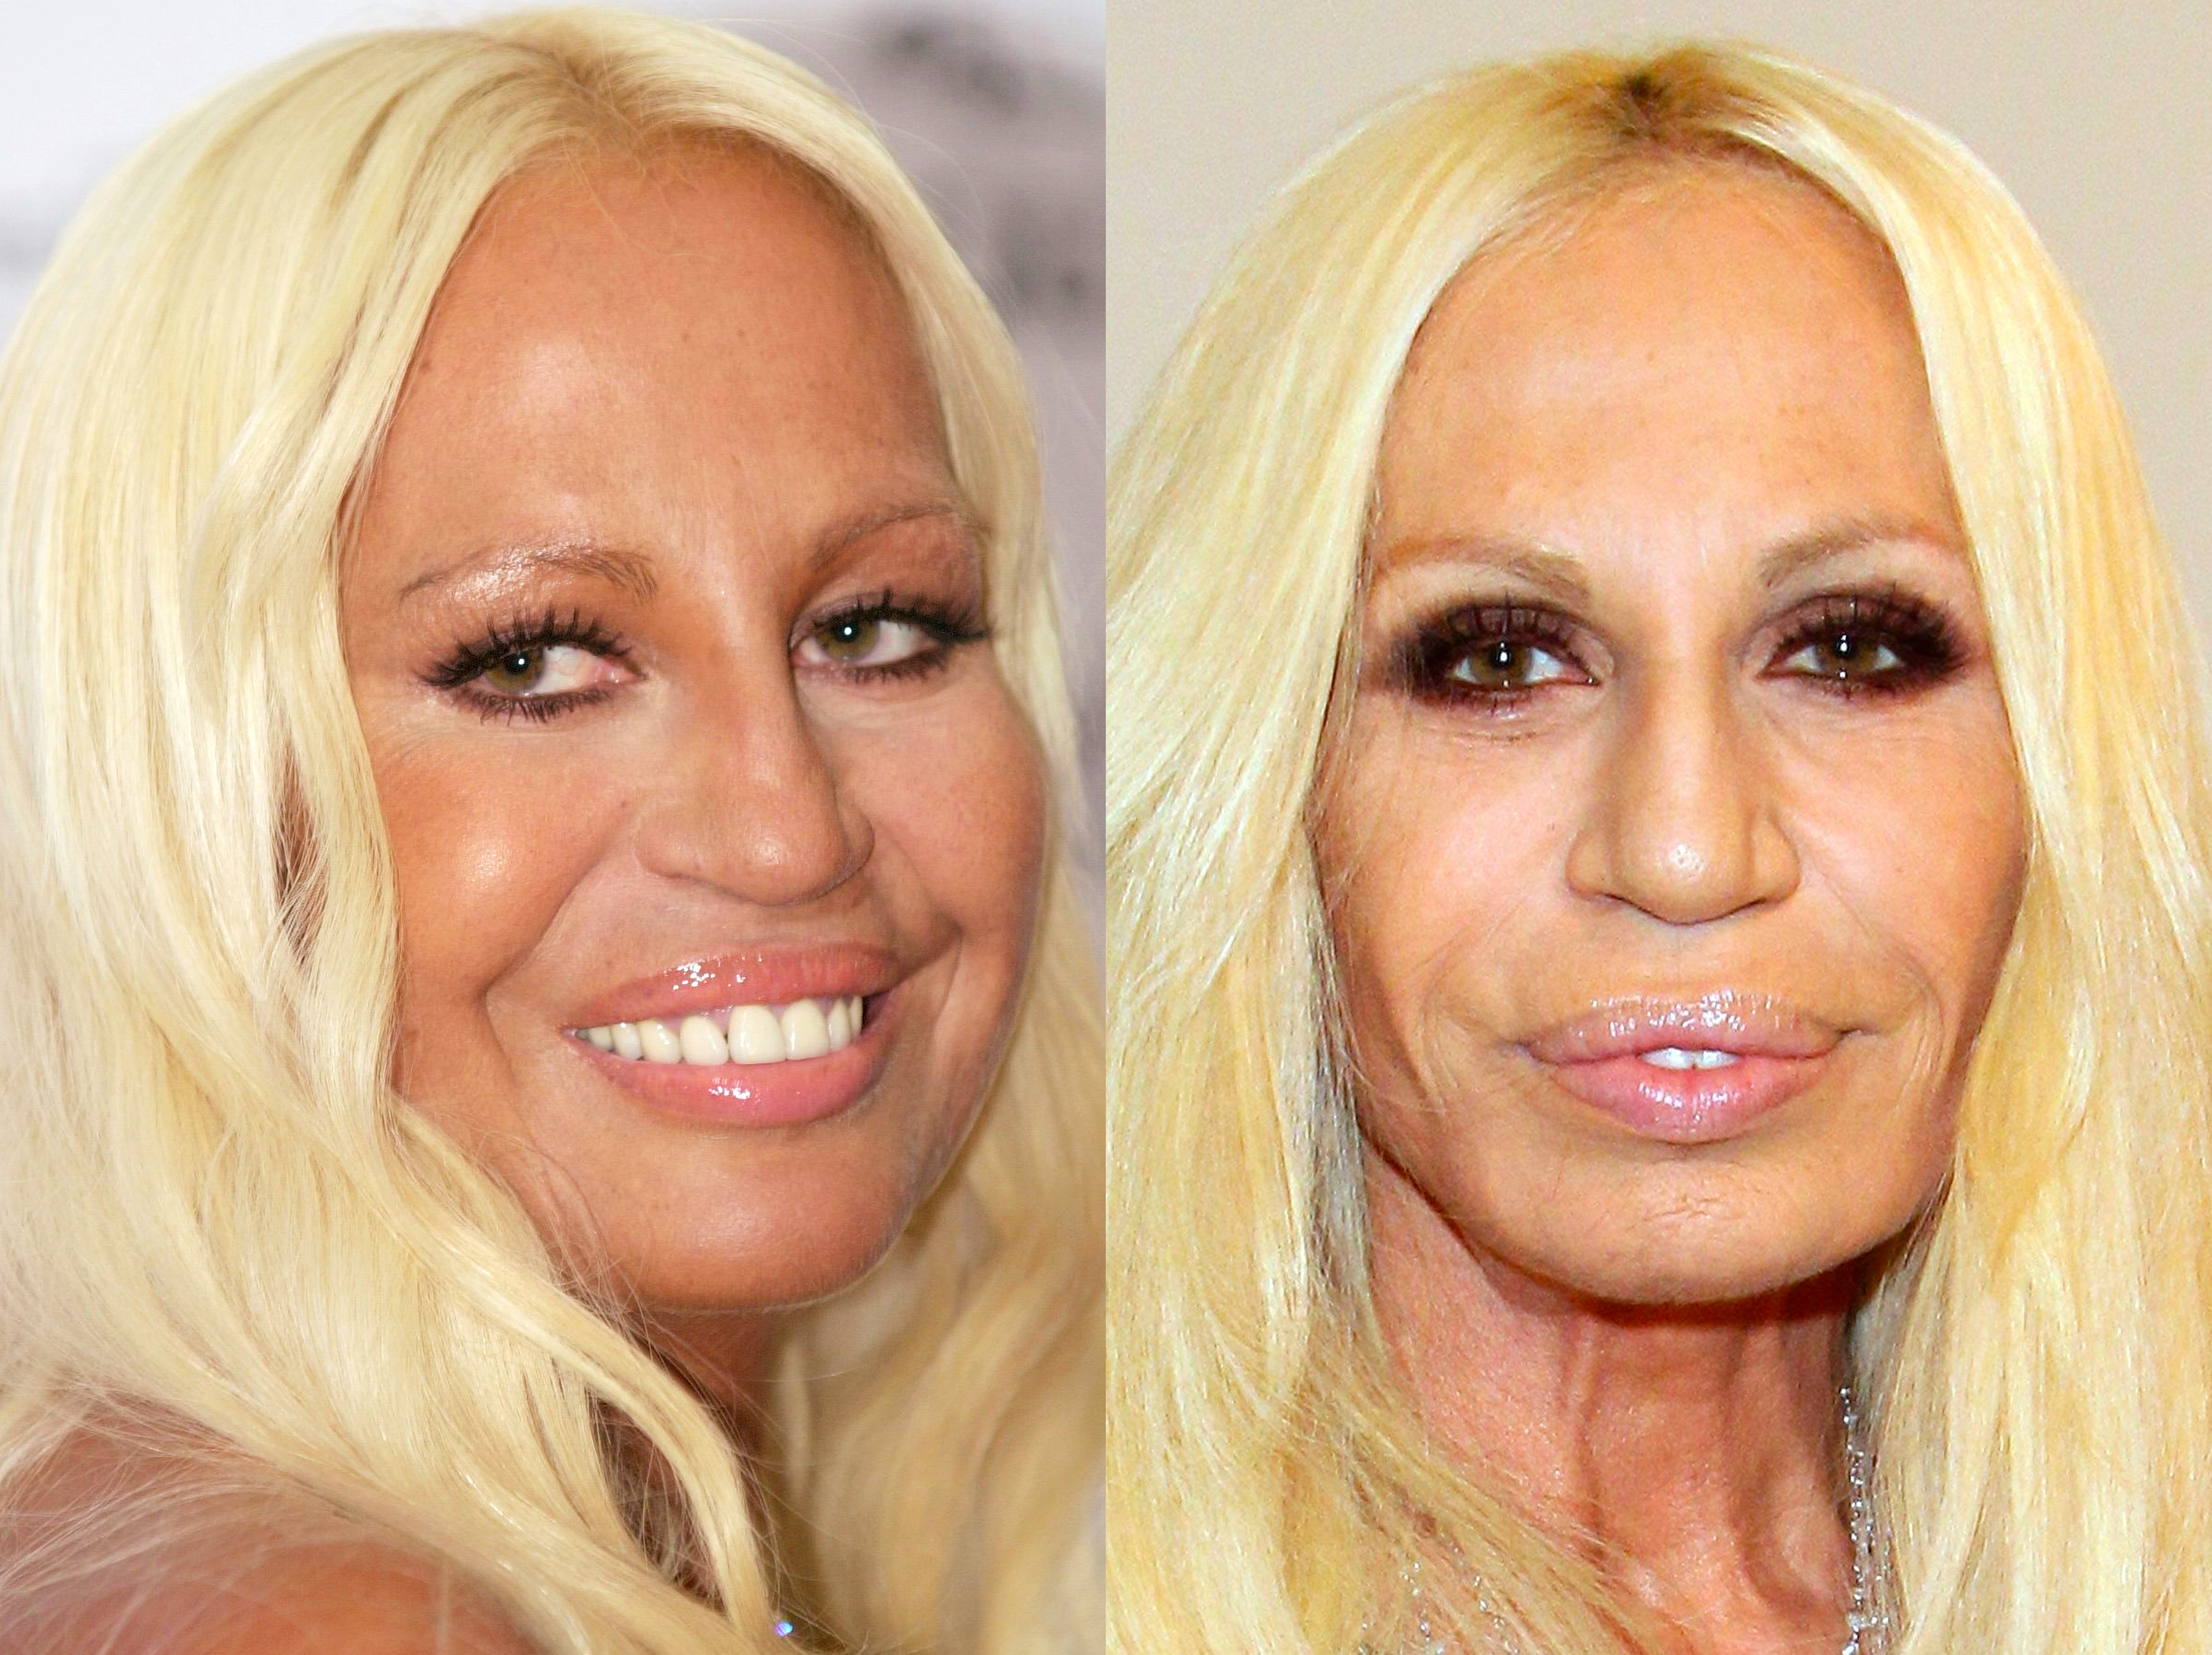 Donatella Versace in 2001 vs 2010 | Source: Getty Images